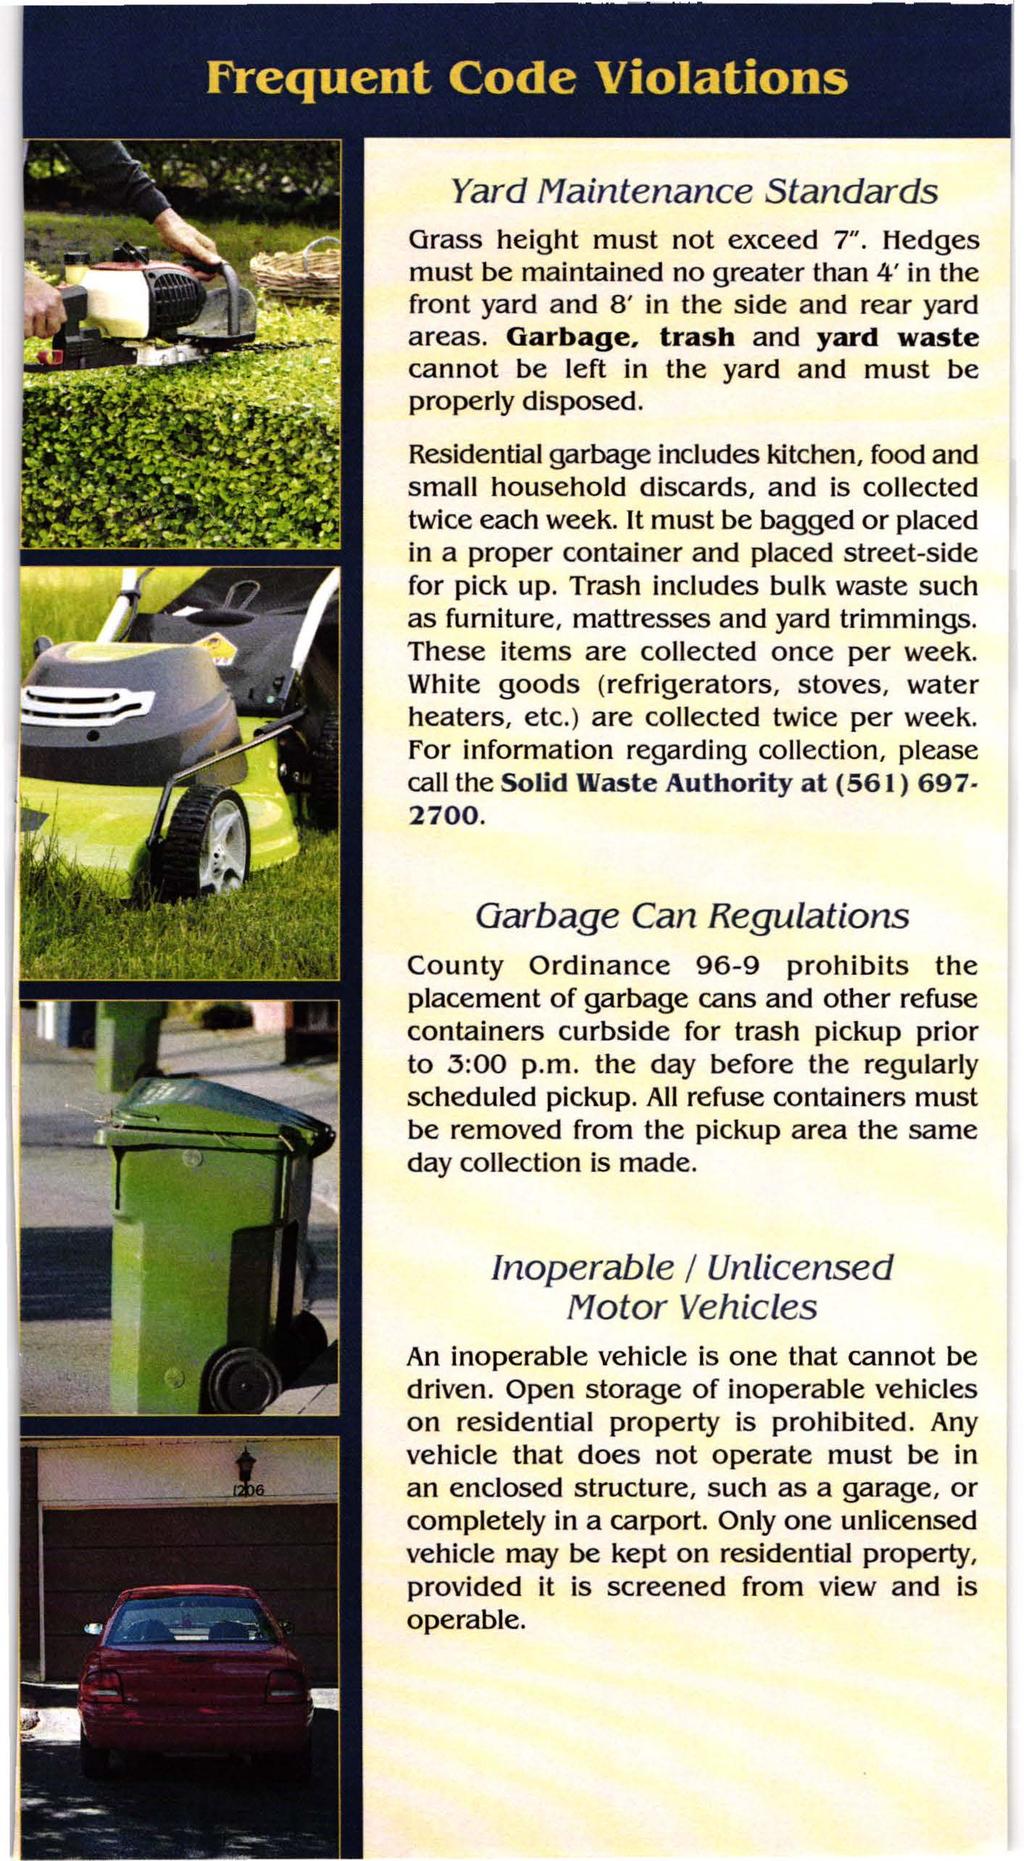 Yard Maintenance Standards Grass height must not exceed 7". Hedges must be maintained no greater than 4' in the front yard and 8' in the side and rear yard areas. Garbage.